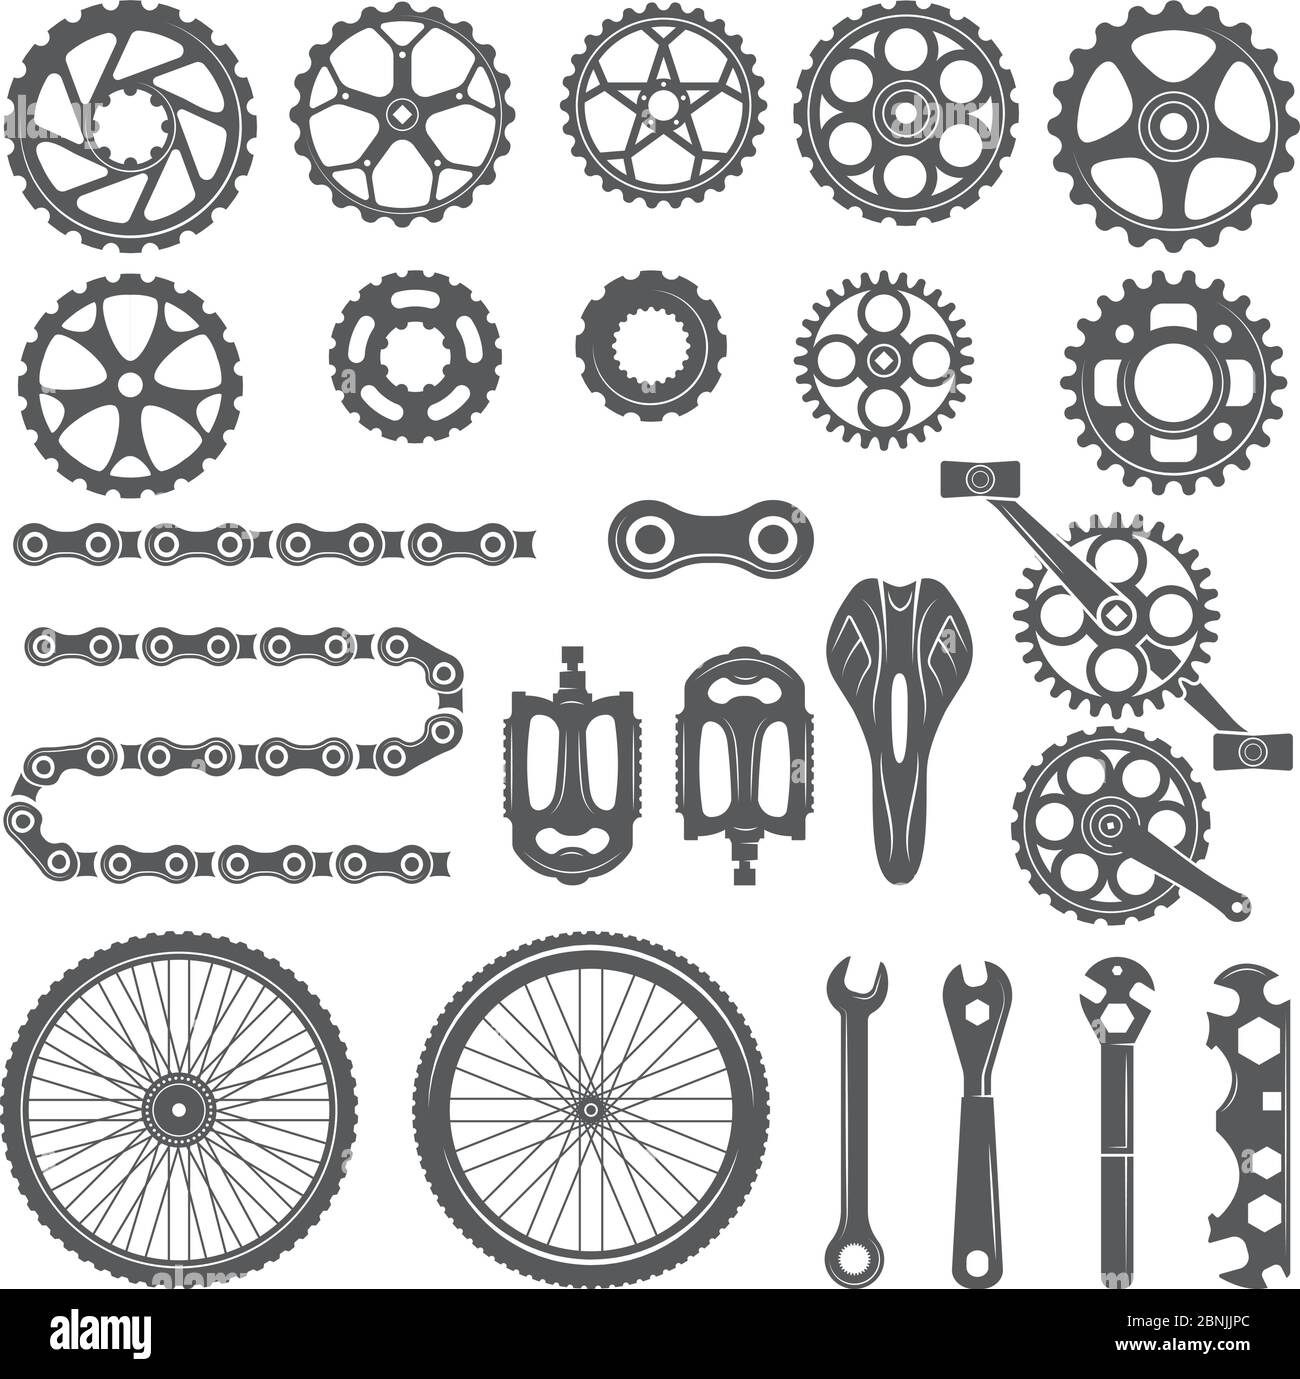 Gears, chains, wheels and other different parts of bicycle Stock Vector. 